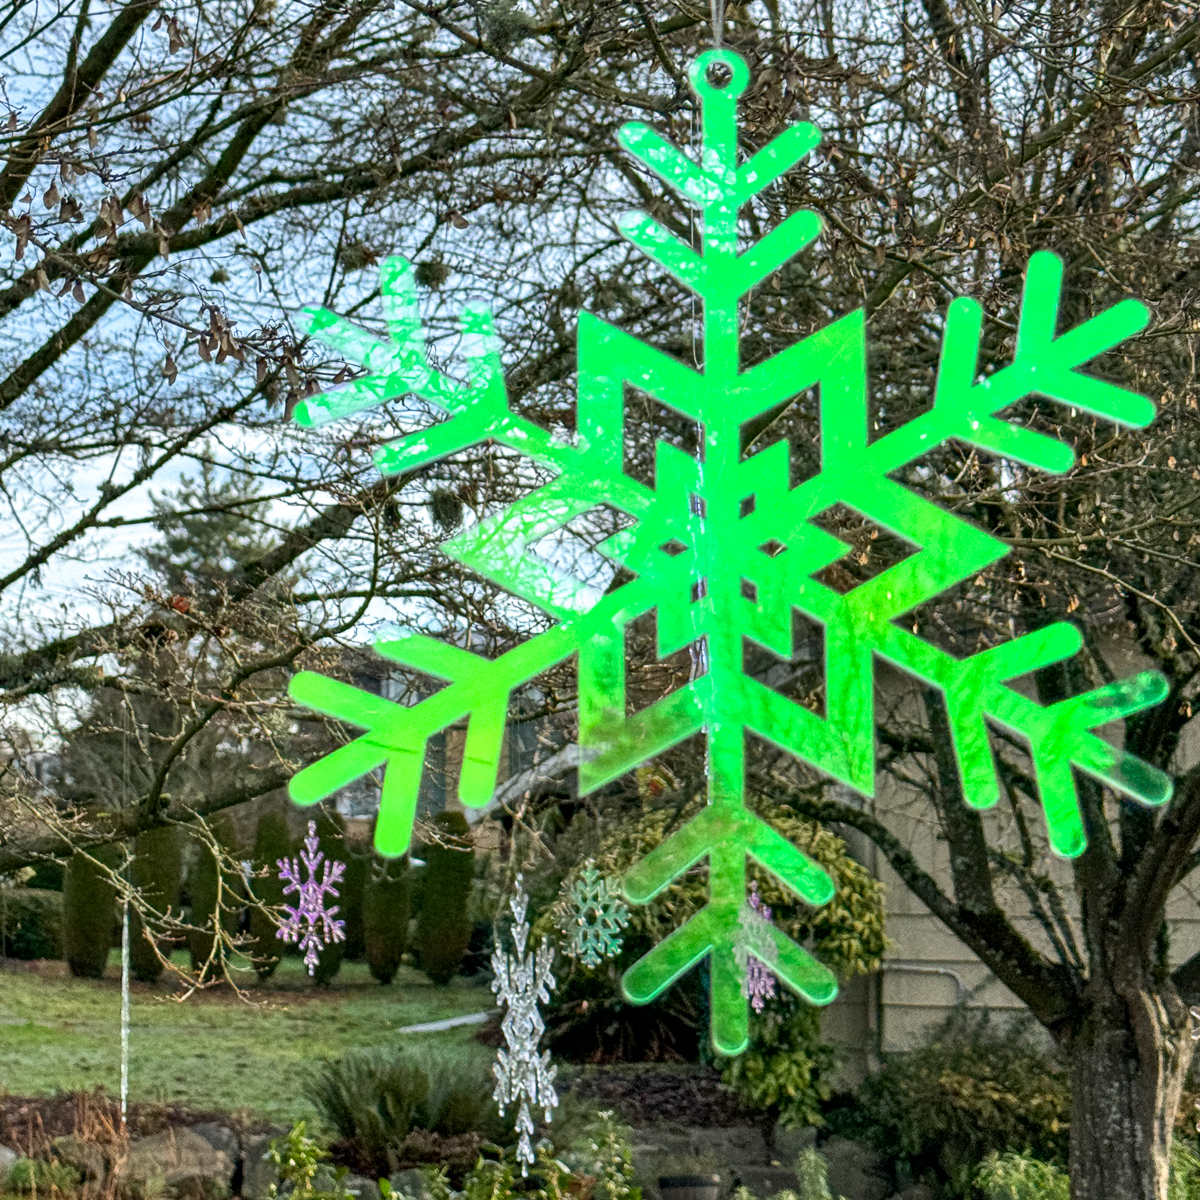 DIY outdoor snowflake decorations hanging in a tree in the front yard